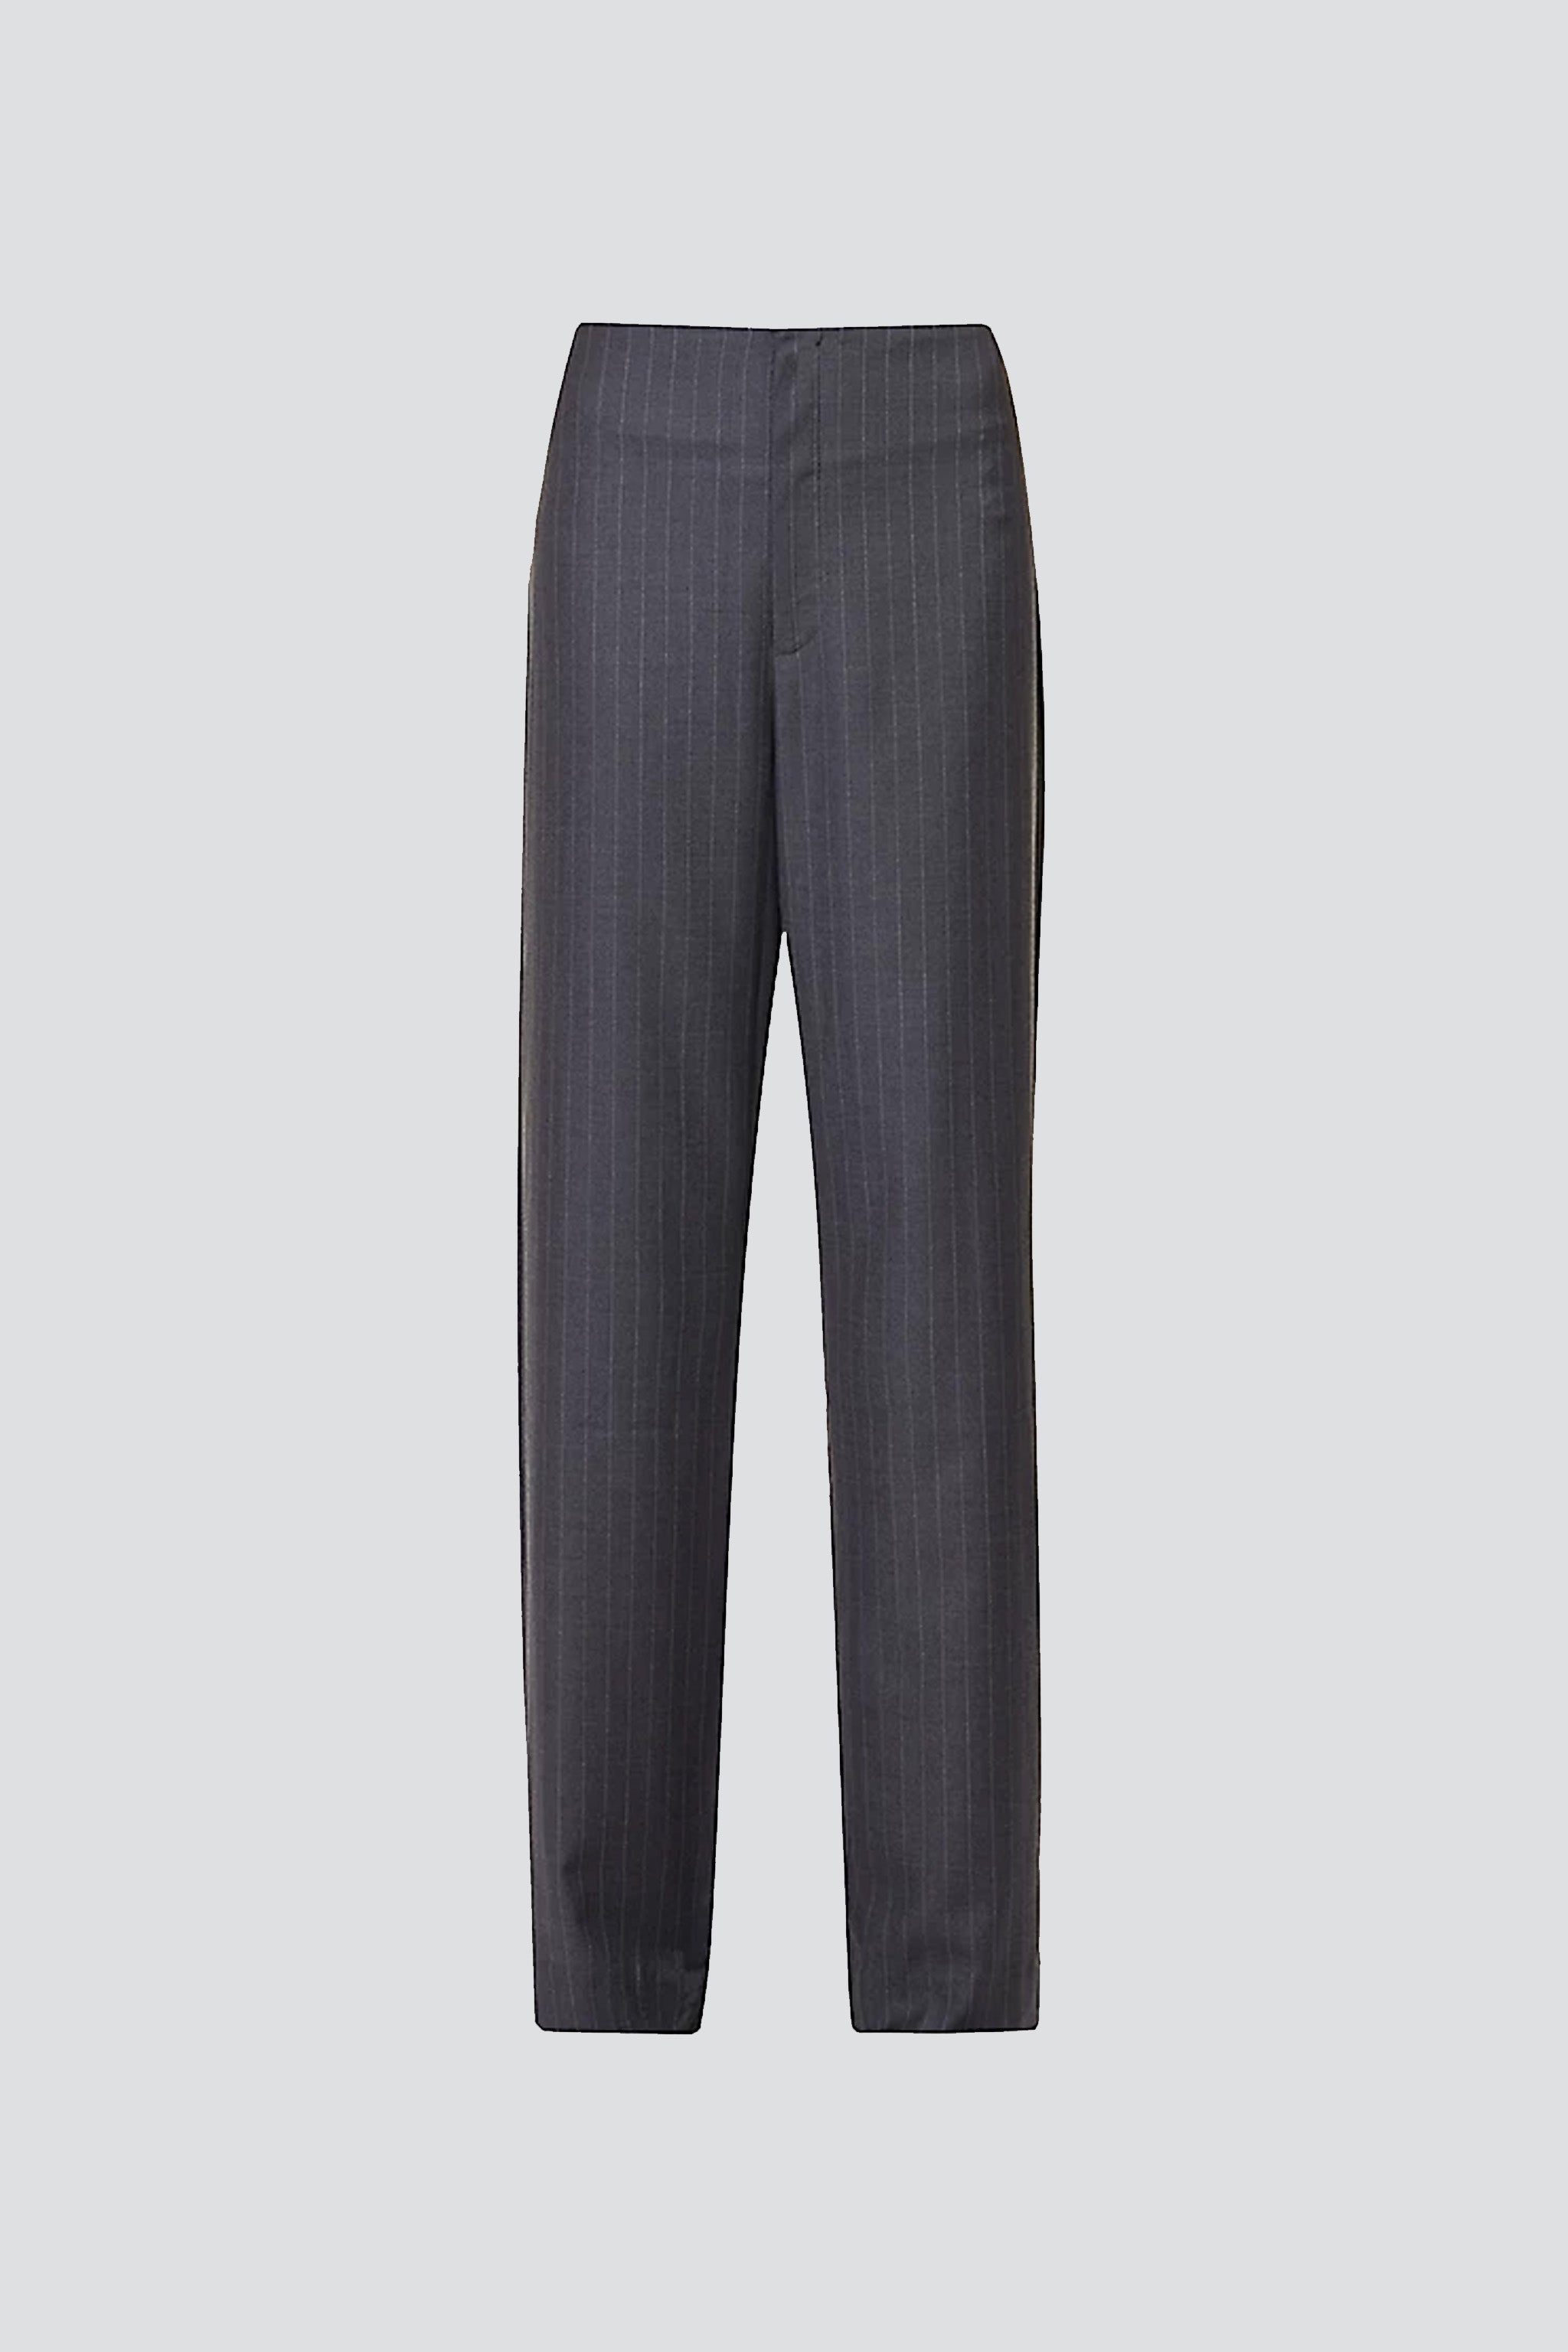 Grey Pinstripe Ally High Waisted Trouser